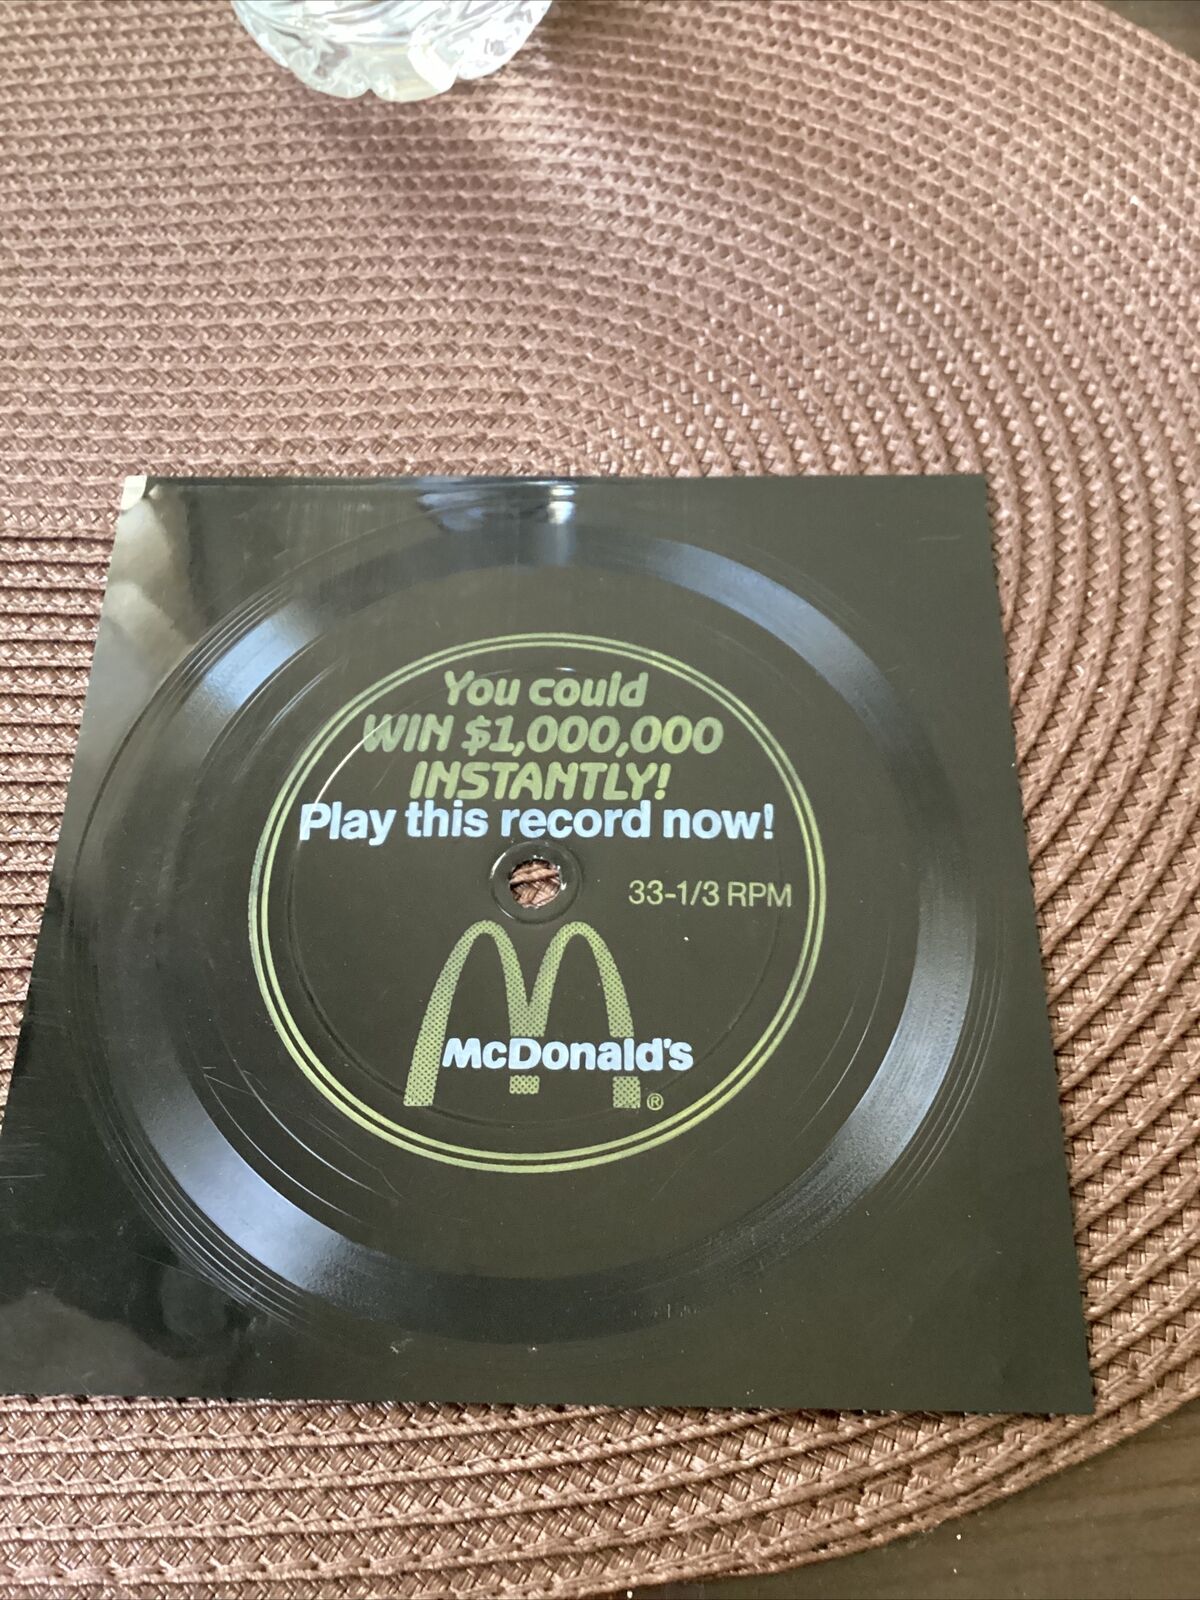 1988 Vintage Record You Could Win $1,000,000 Instantly McDonalds Promo